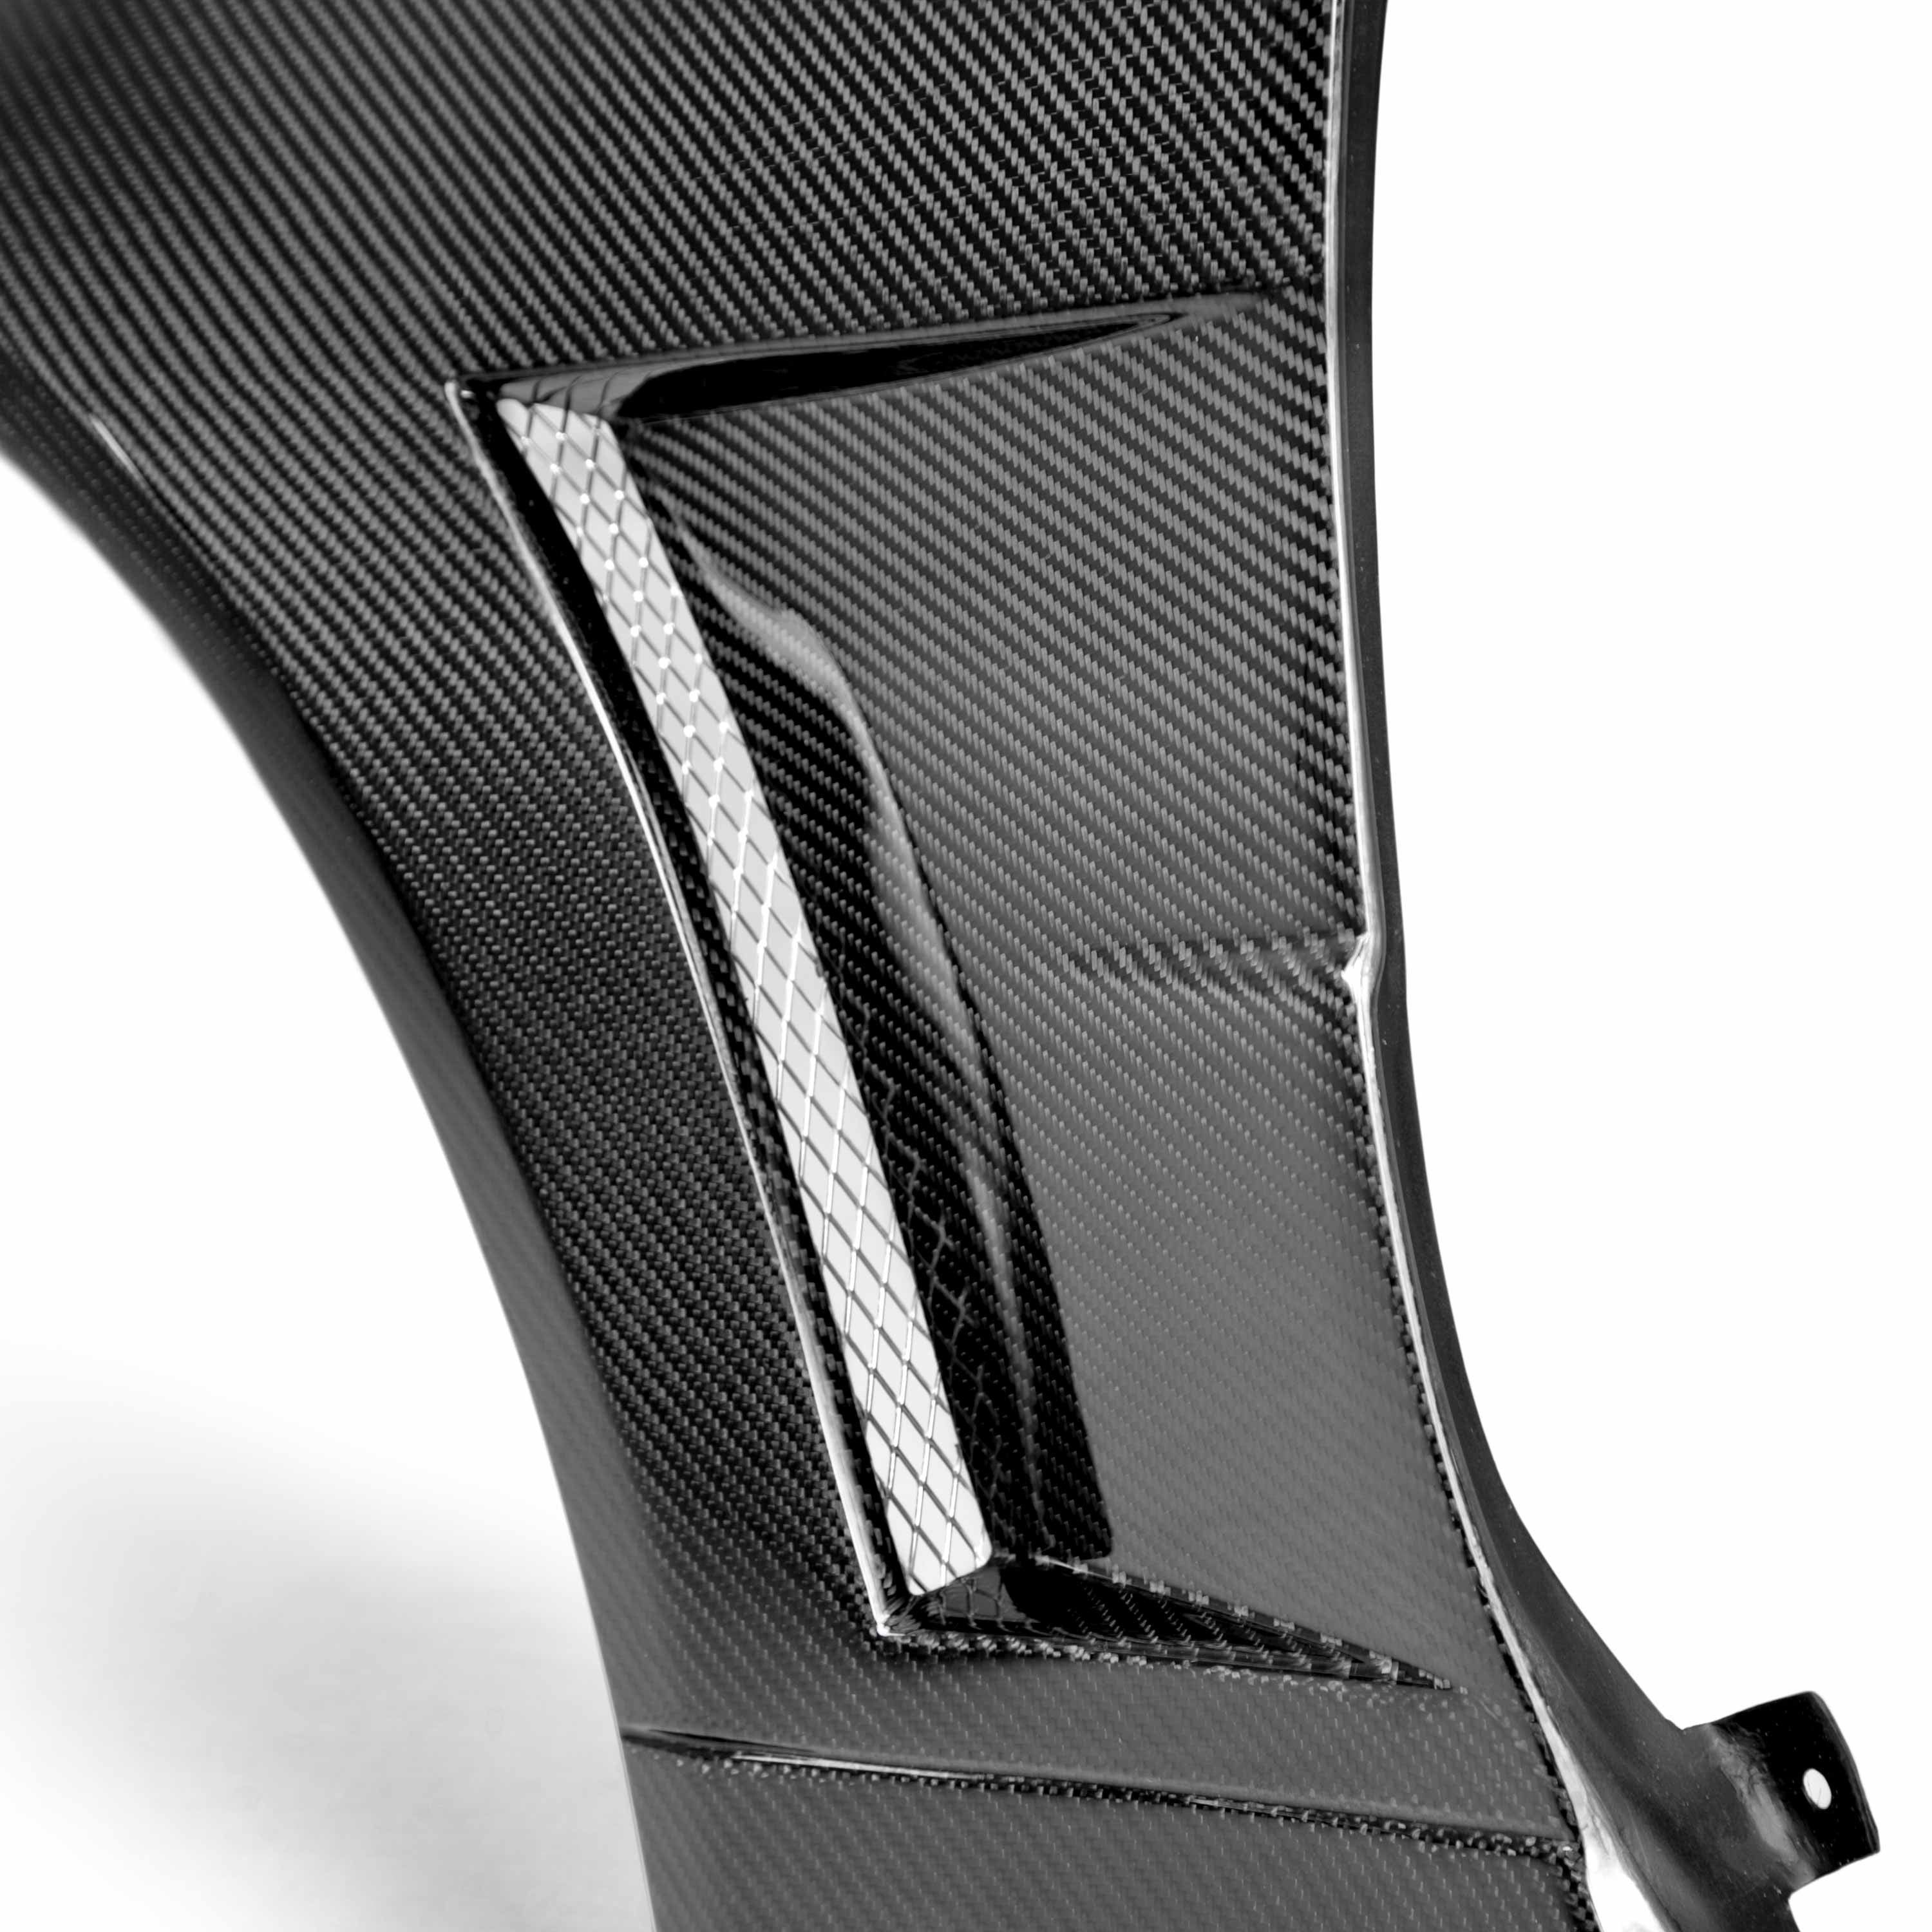 NSW-Style Carbon Fiber Fenders For 1999-2001 Nissan Skyline R34 (10 Mm Wider)